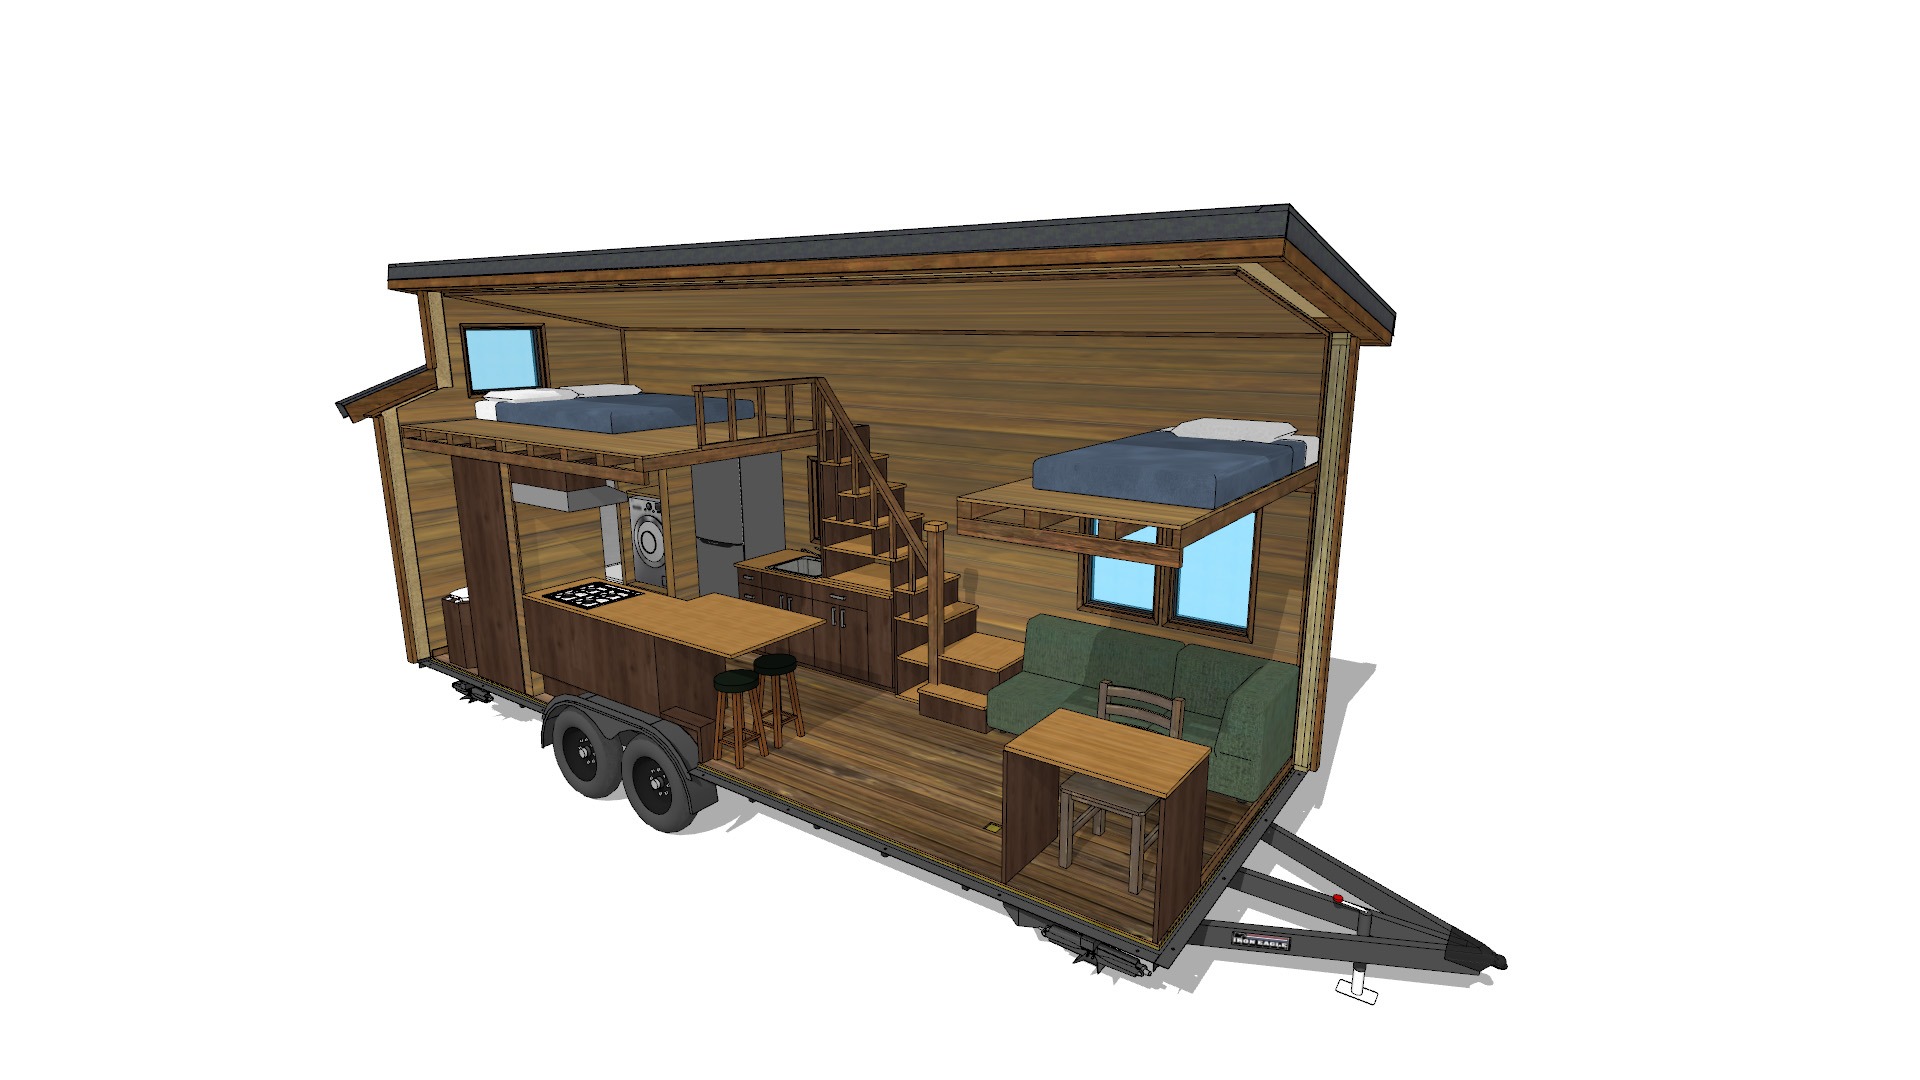 Cider Box Tiny House Interior Layout Rendering from Tiny Nest